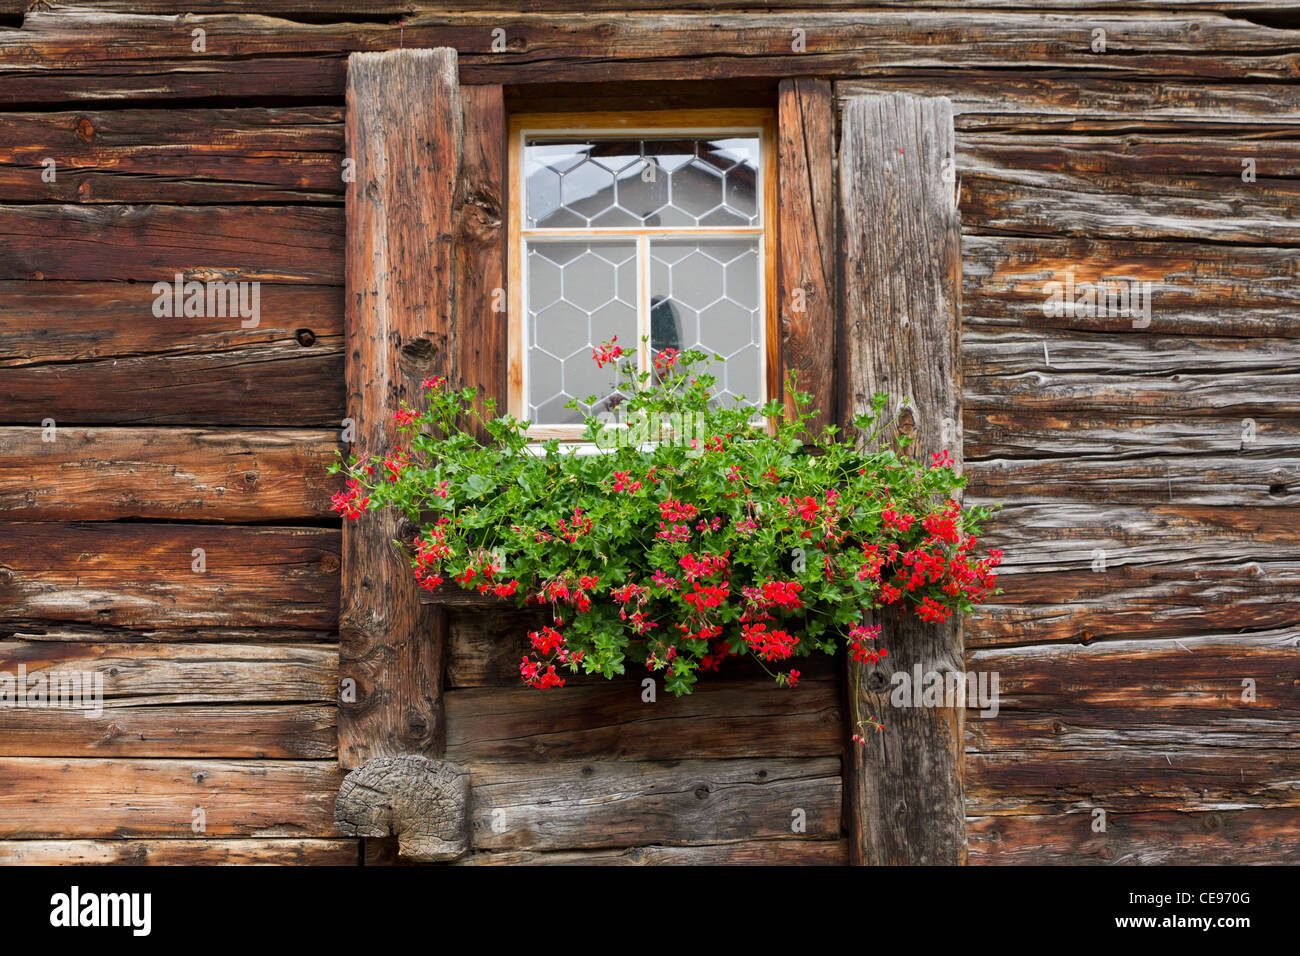 window of a old wooden withered house decorated by red geranium, Switzerland Stock Photo